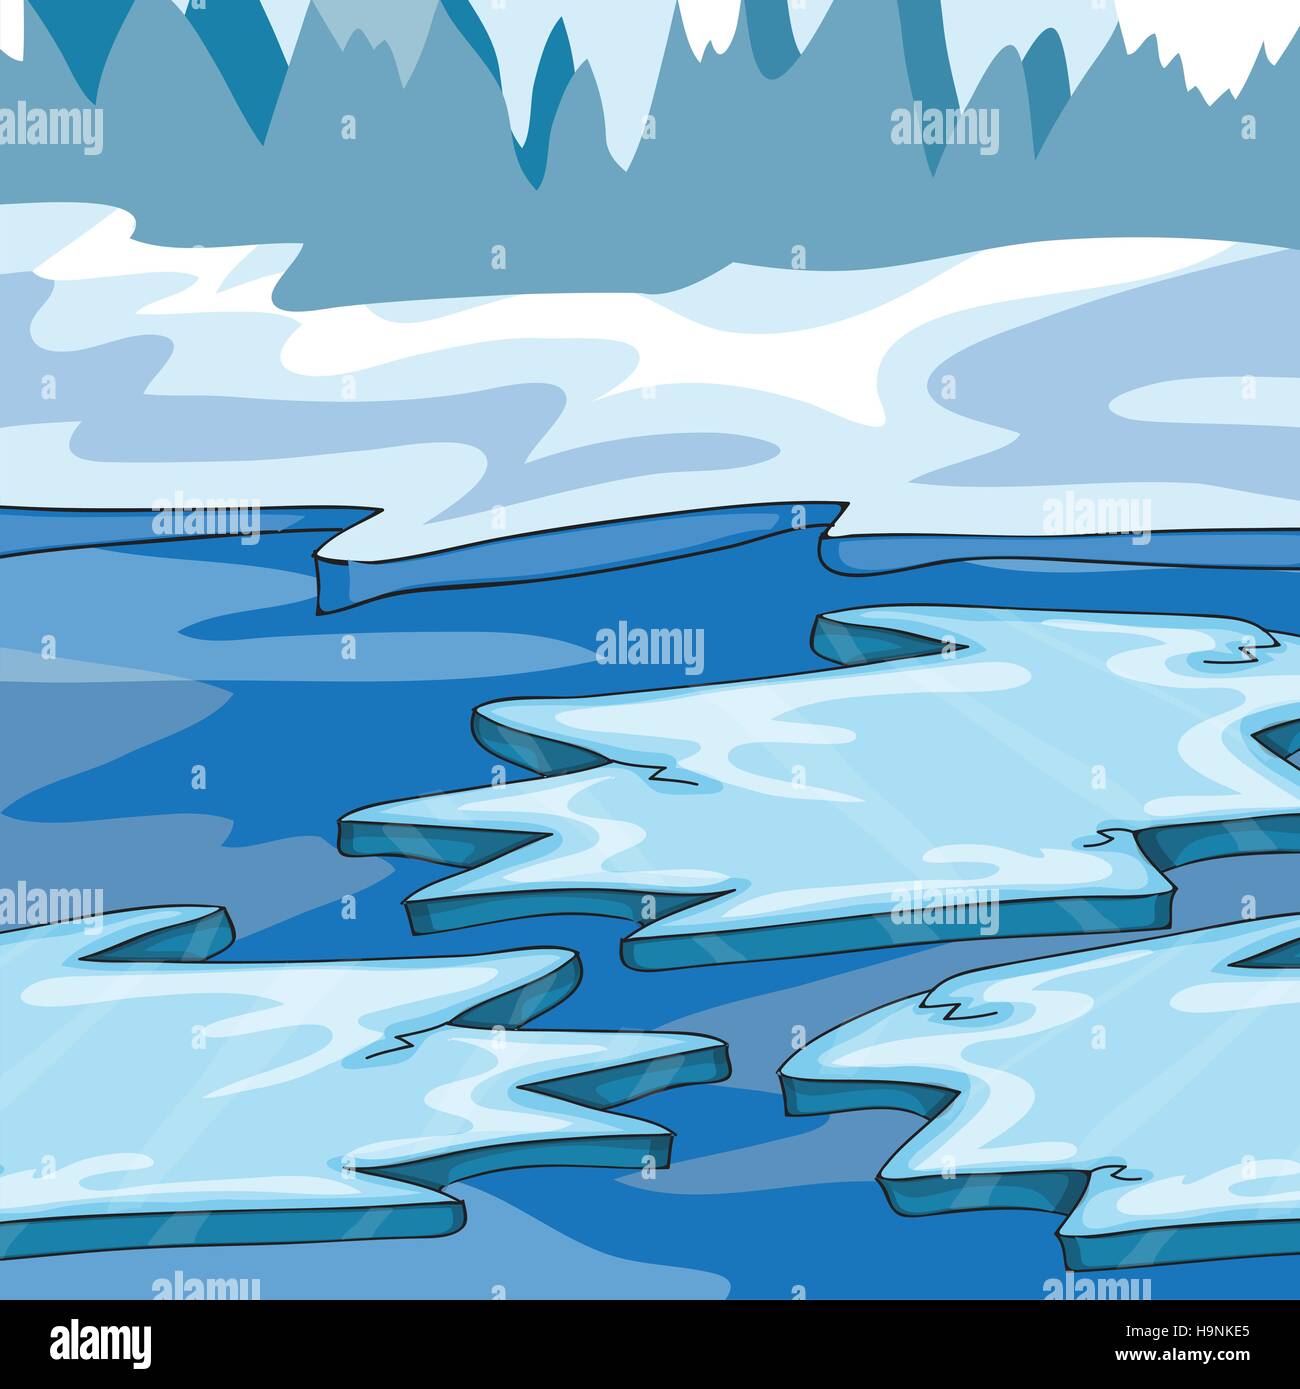 Iceland - Cartoon Vector Illustration - ice floes in the ocean Stock Vector